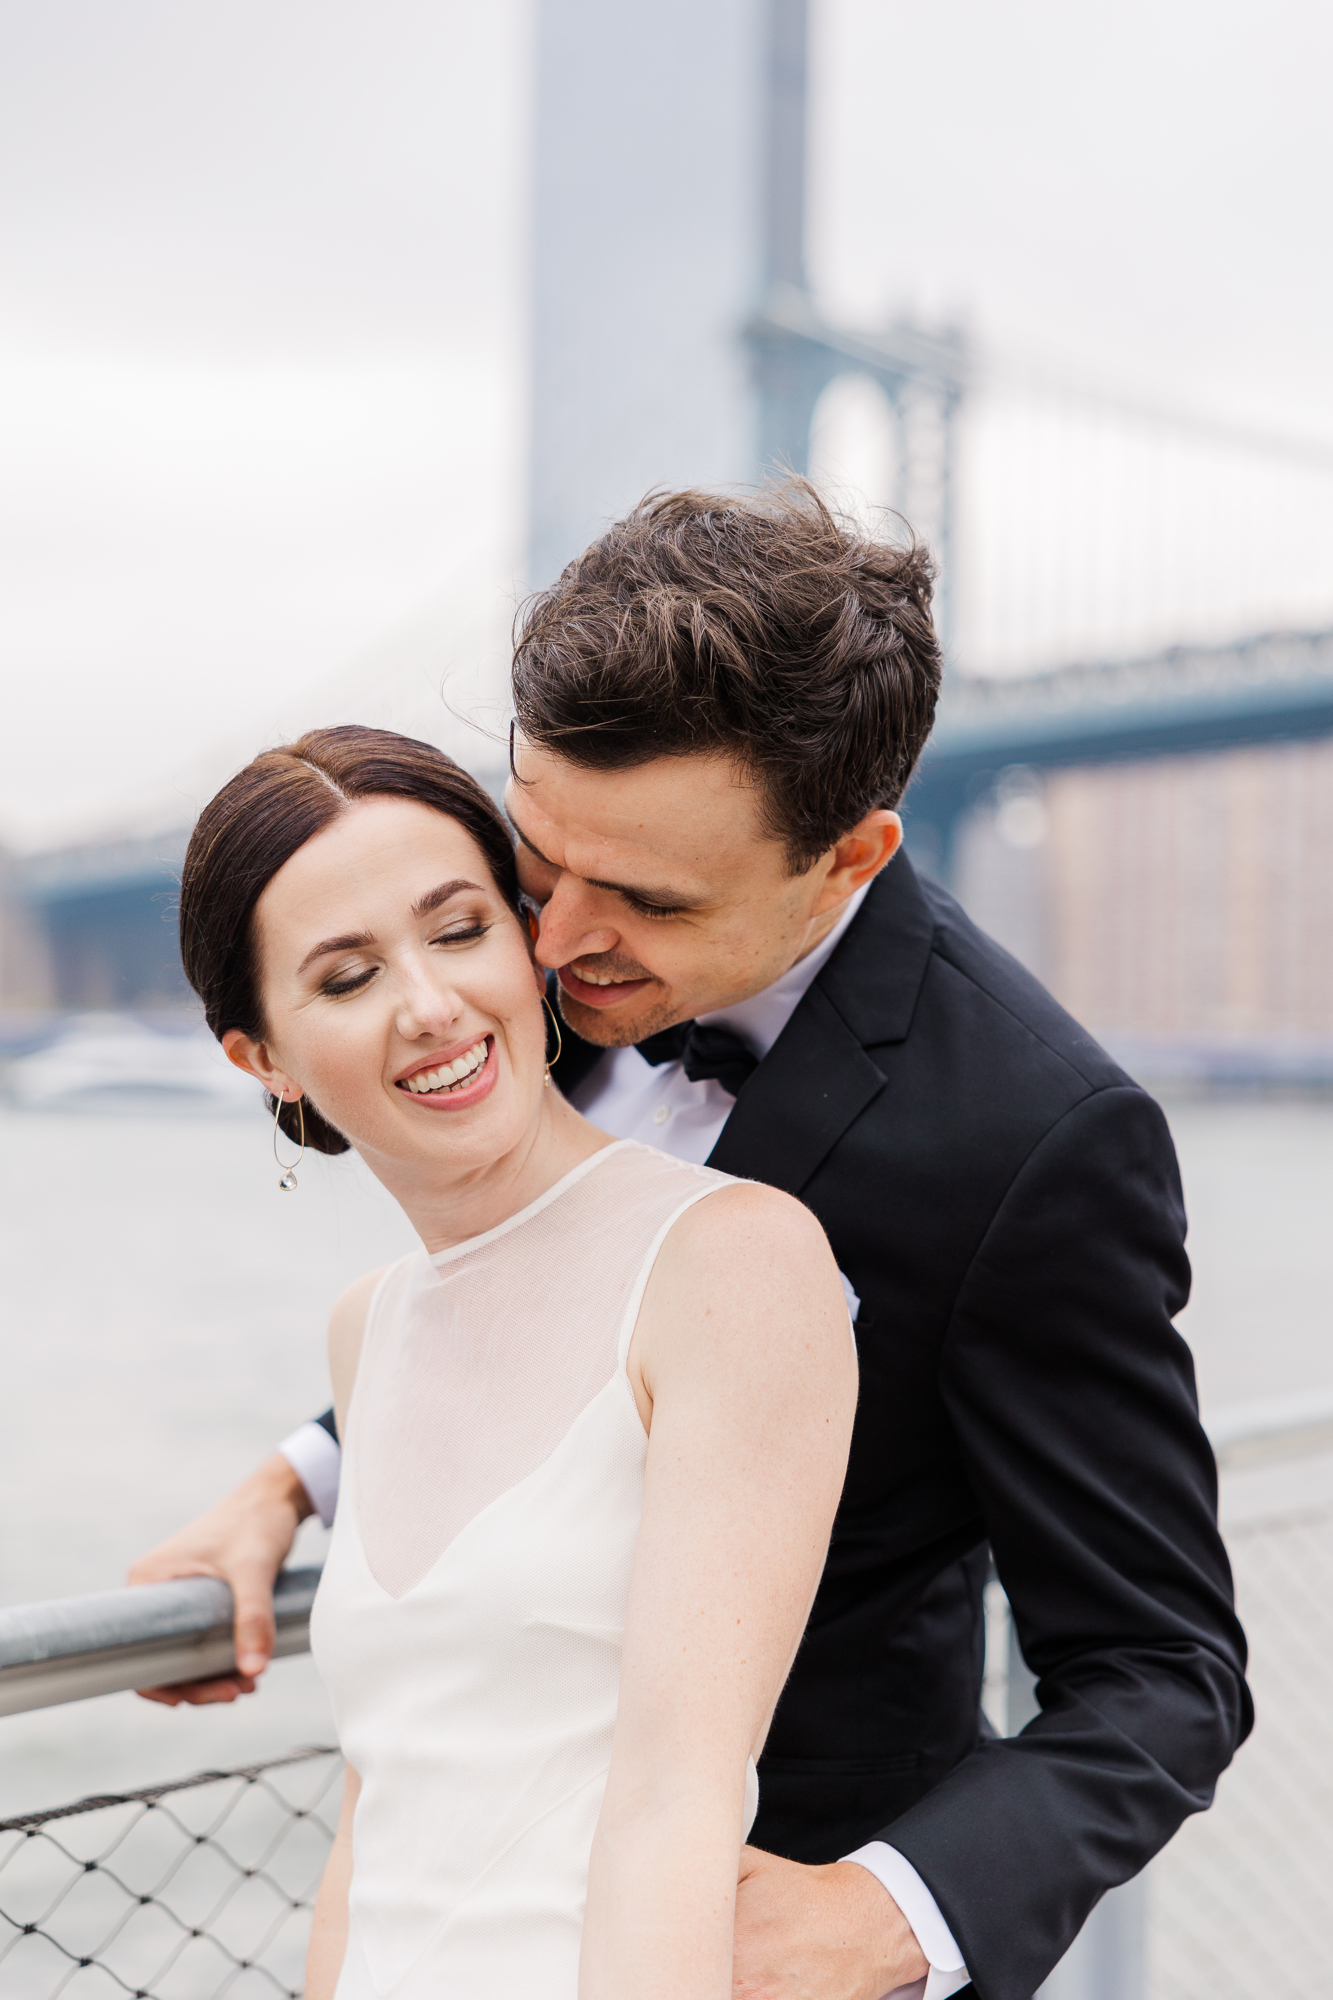 Special DUMBO, Brooklyn Wedding Photos at Smack Mellon and Jane's Carousel